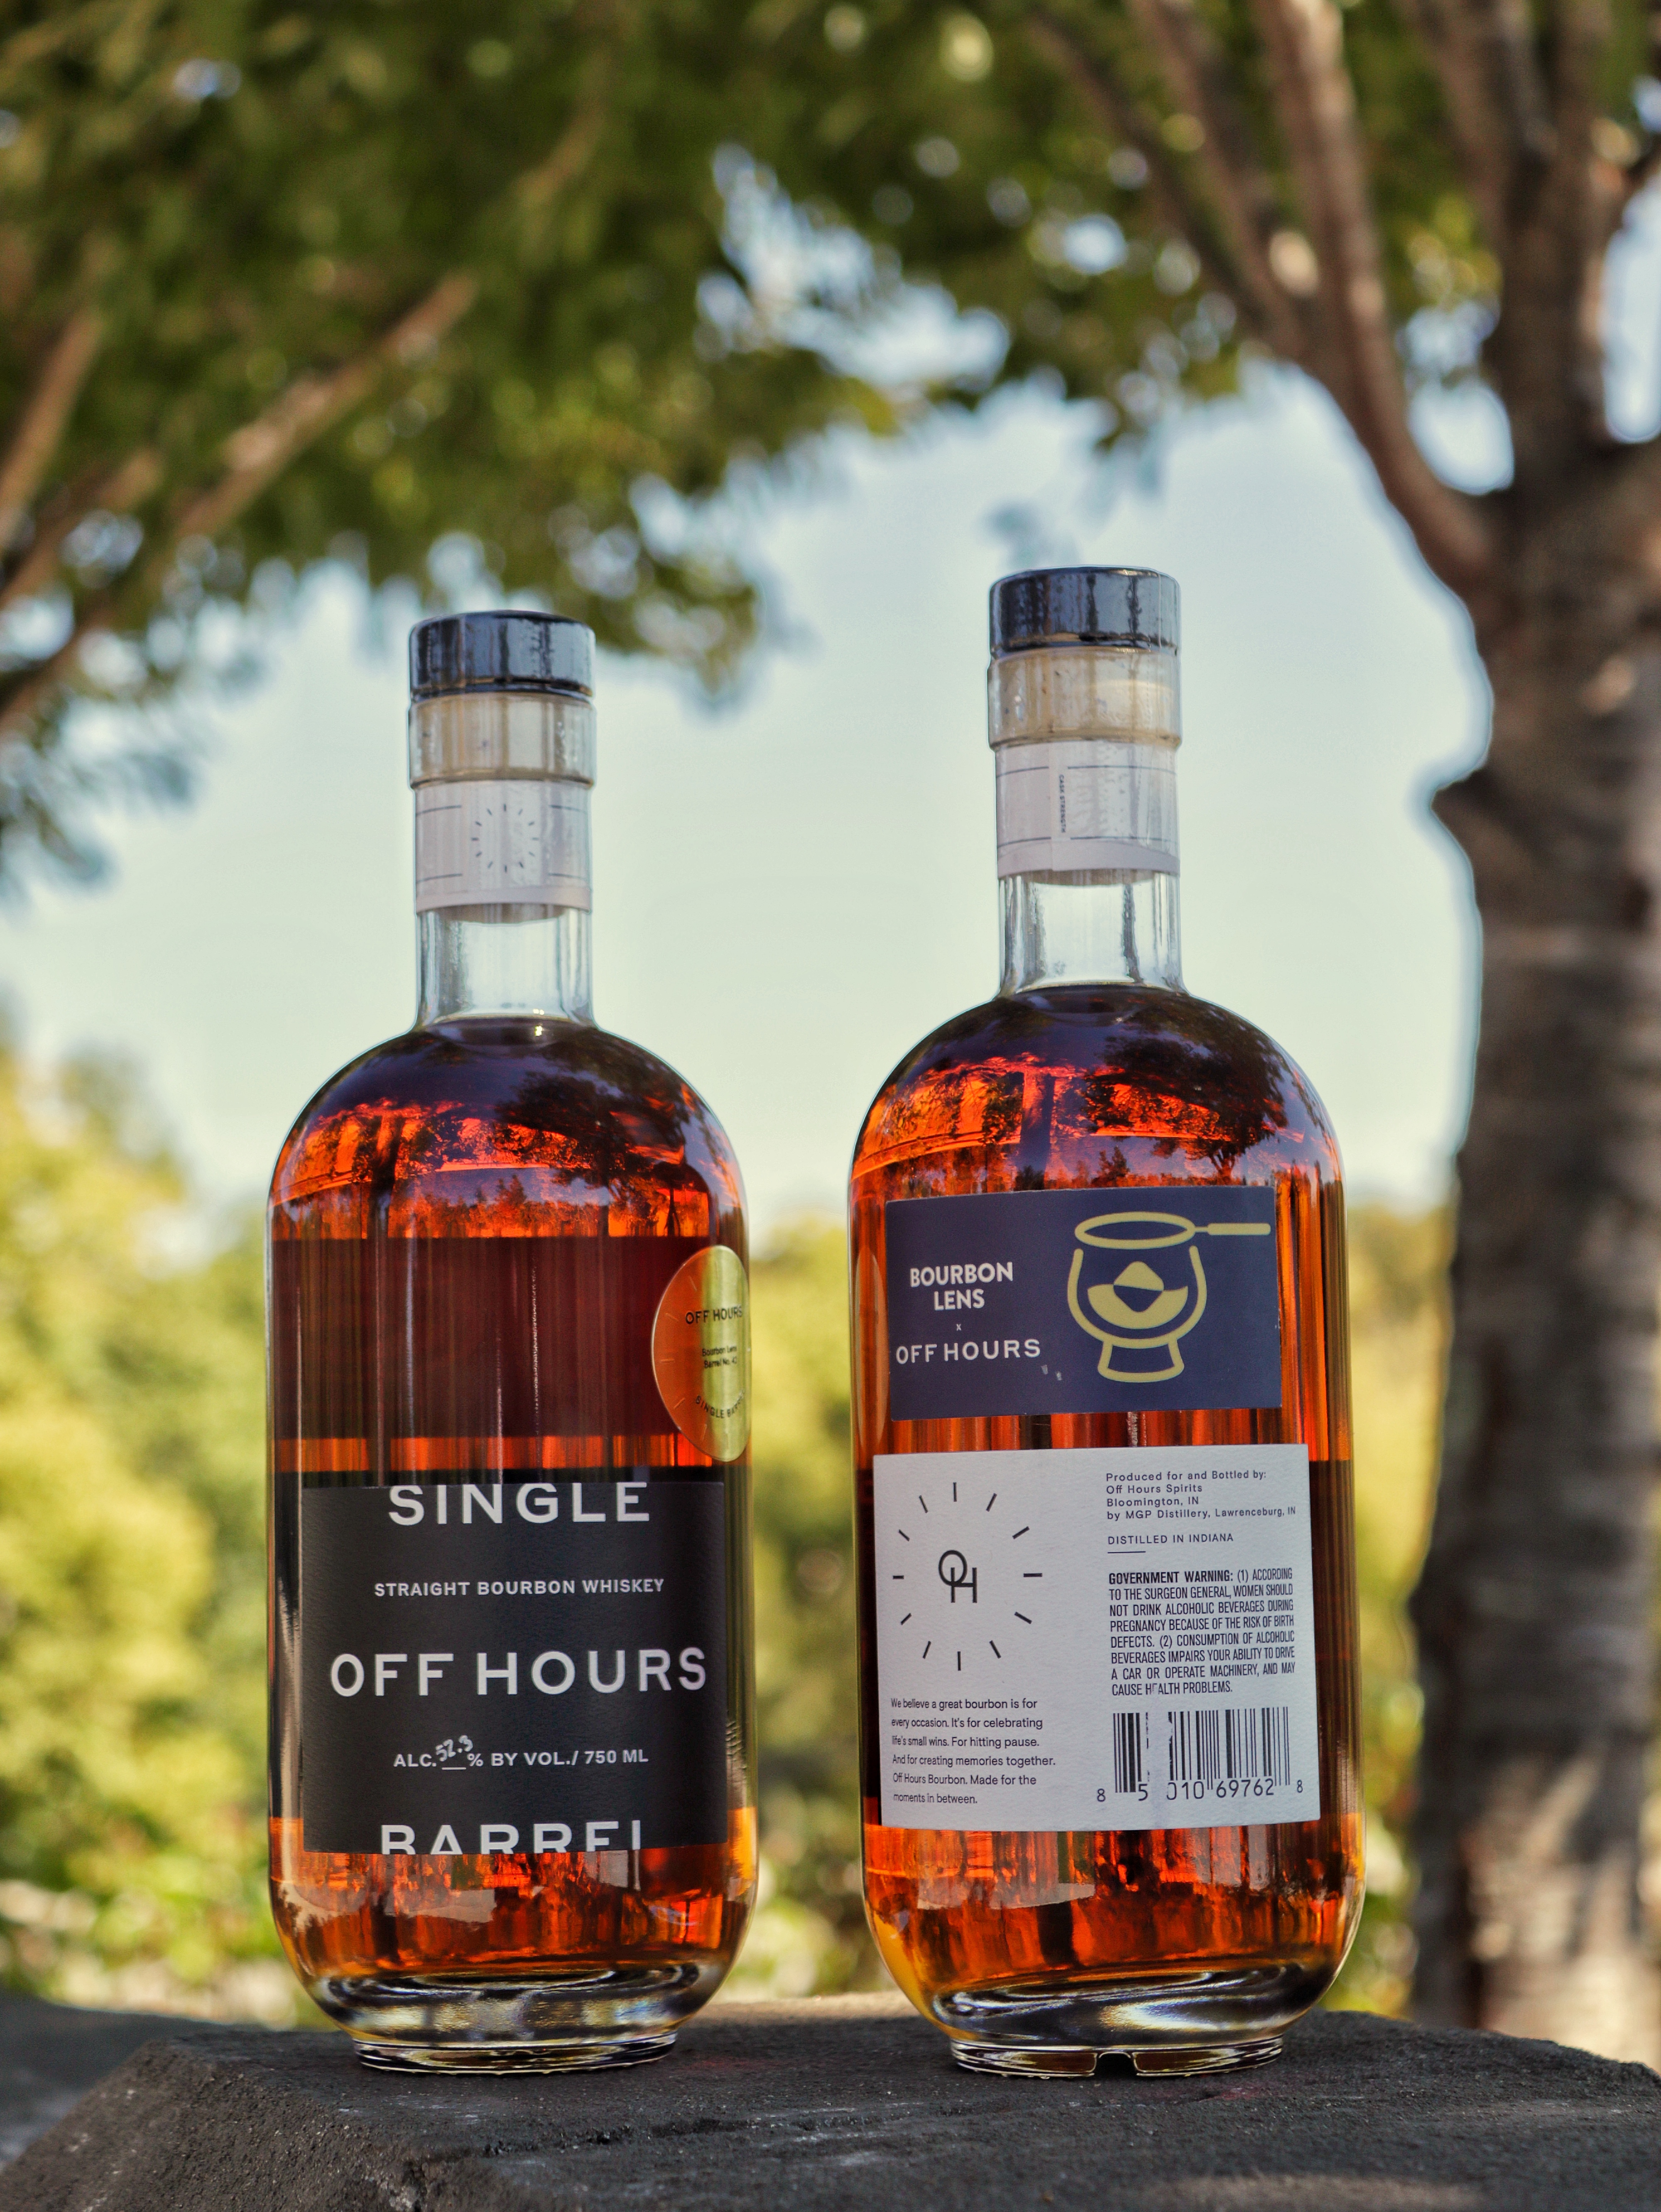 Off Hours with Bourbon Lens Single Barrel Available Now